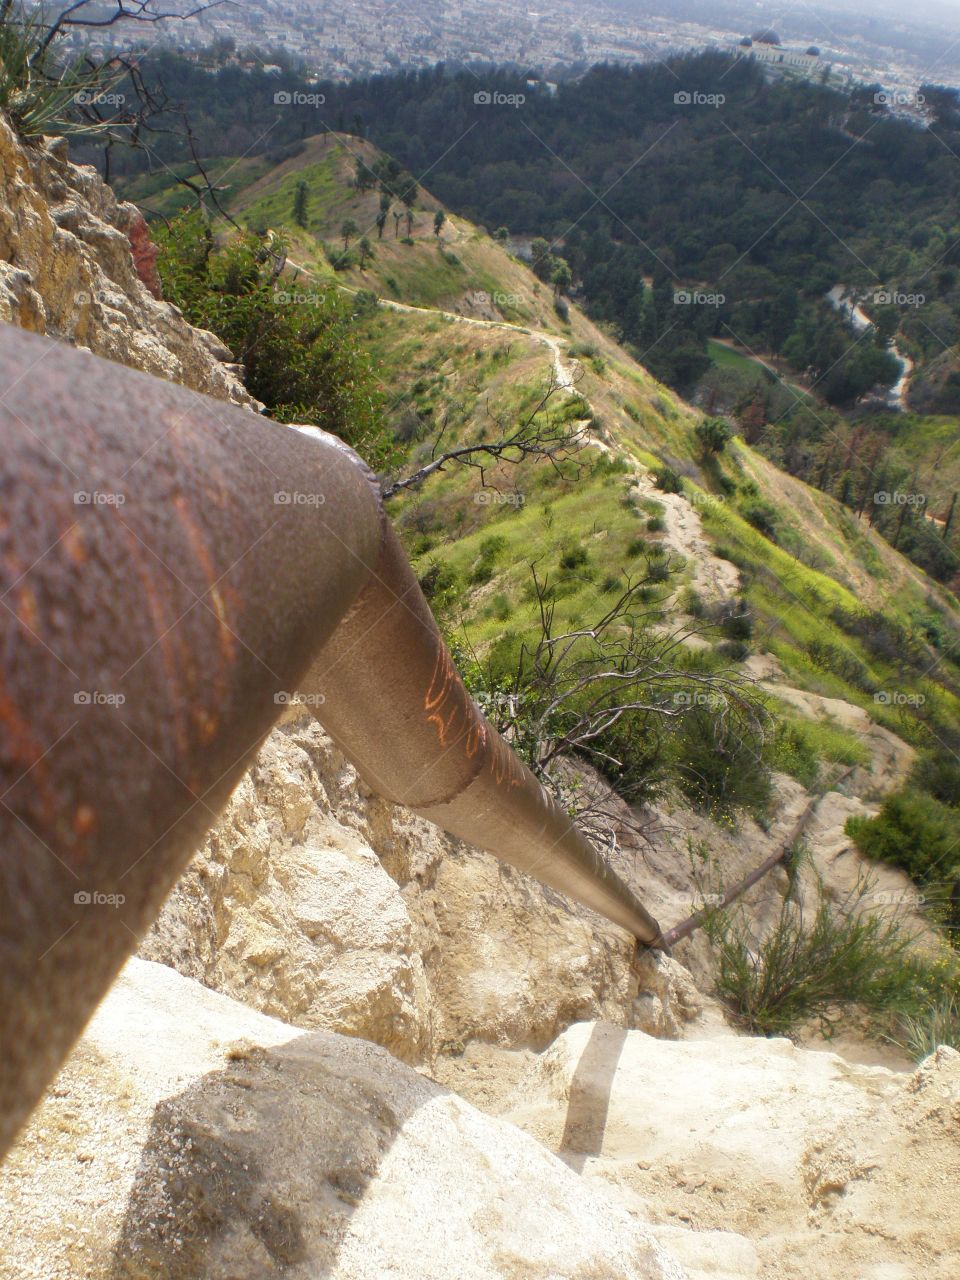 A pipe running down a hill